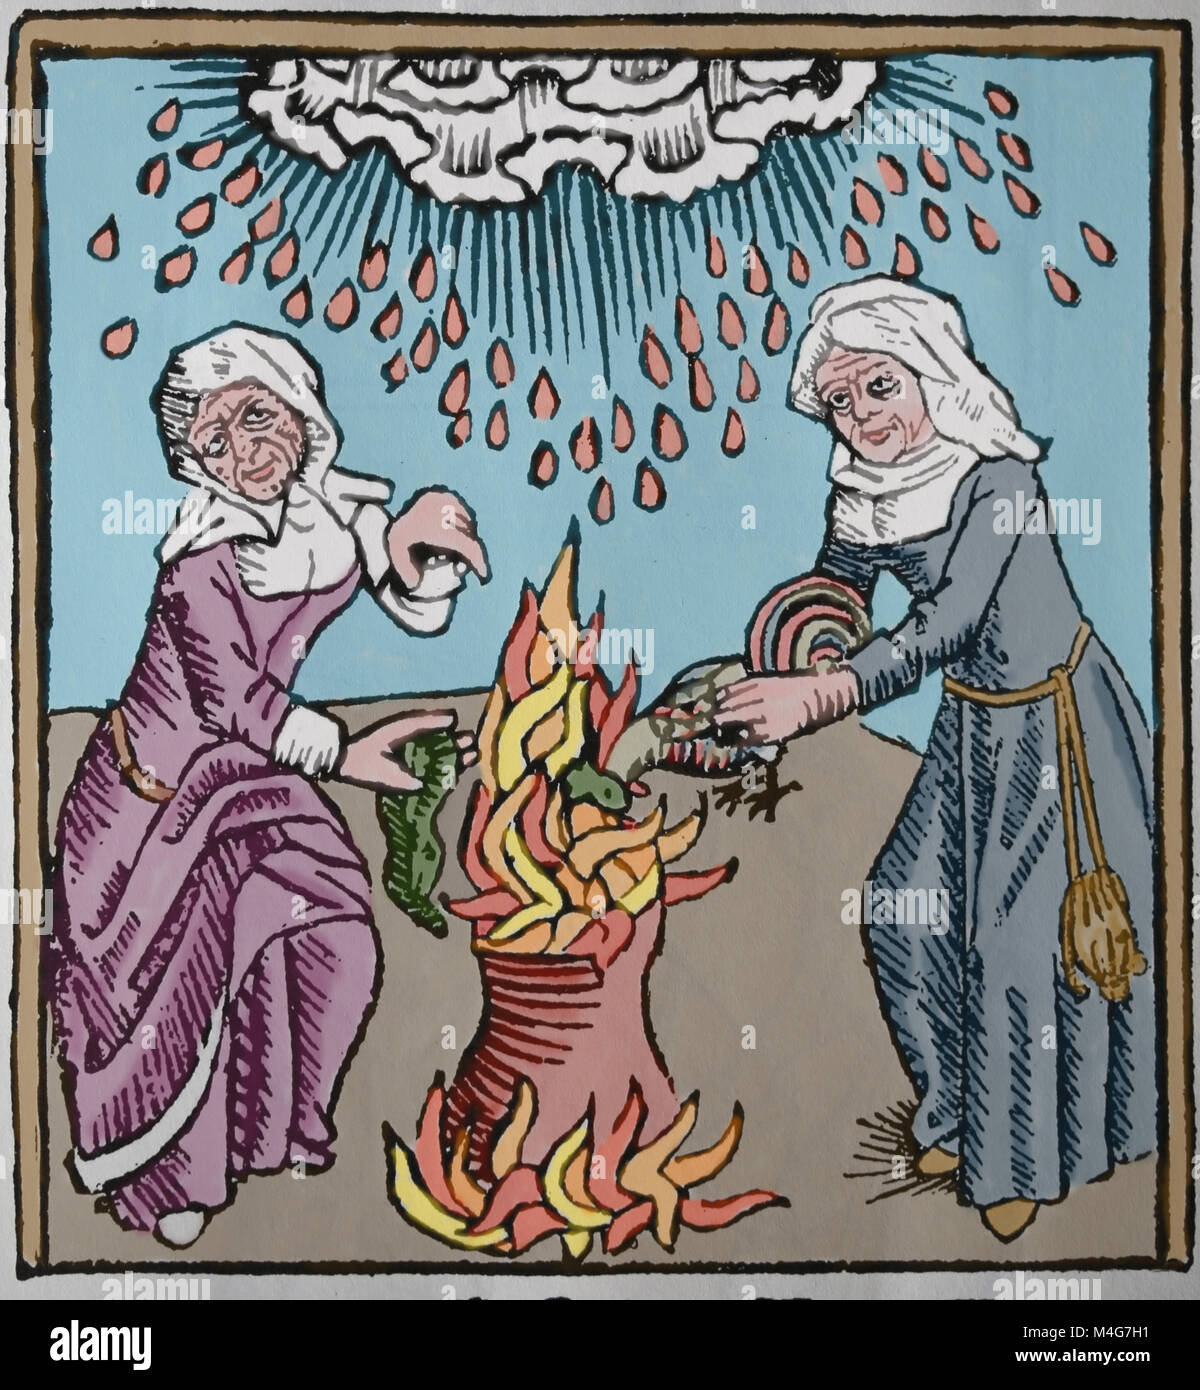 Witches brewing up a hilstorm. 'Of Witches and Diviner Women', 1489 by Ulrich Molitor. Germany. Stock Photo